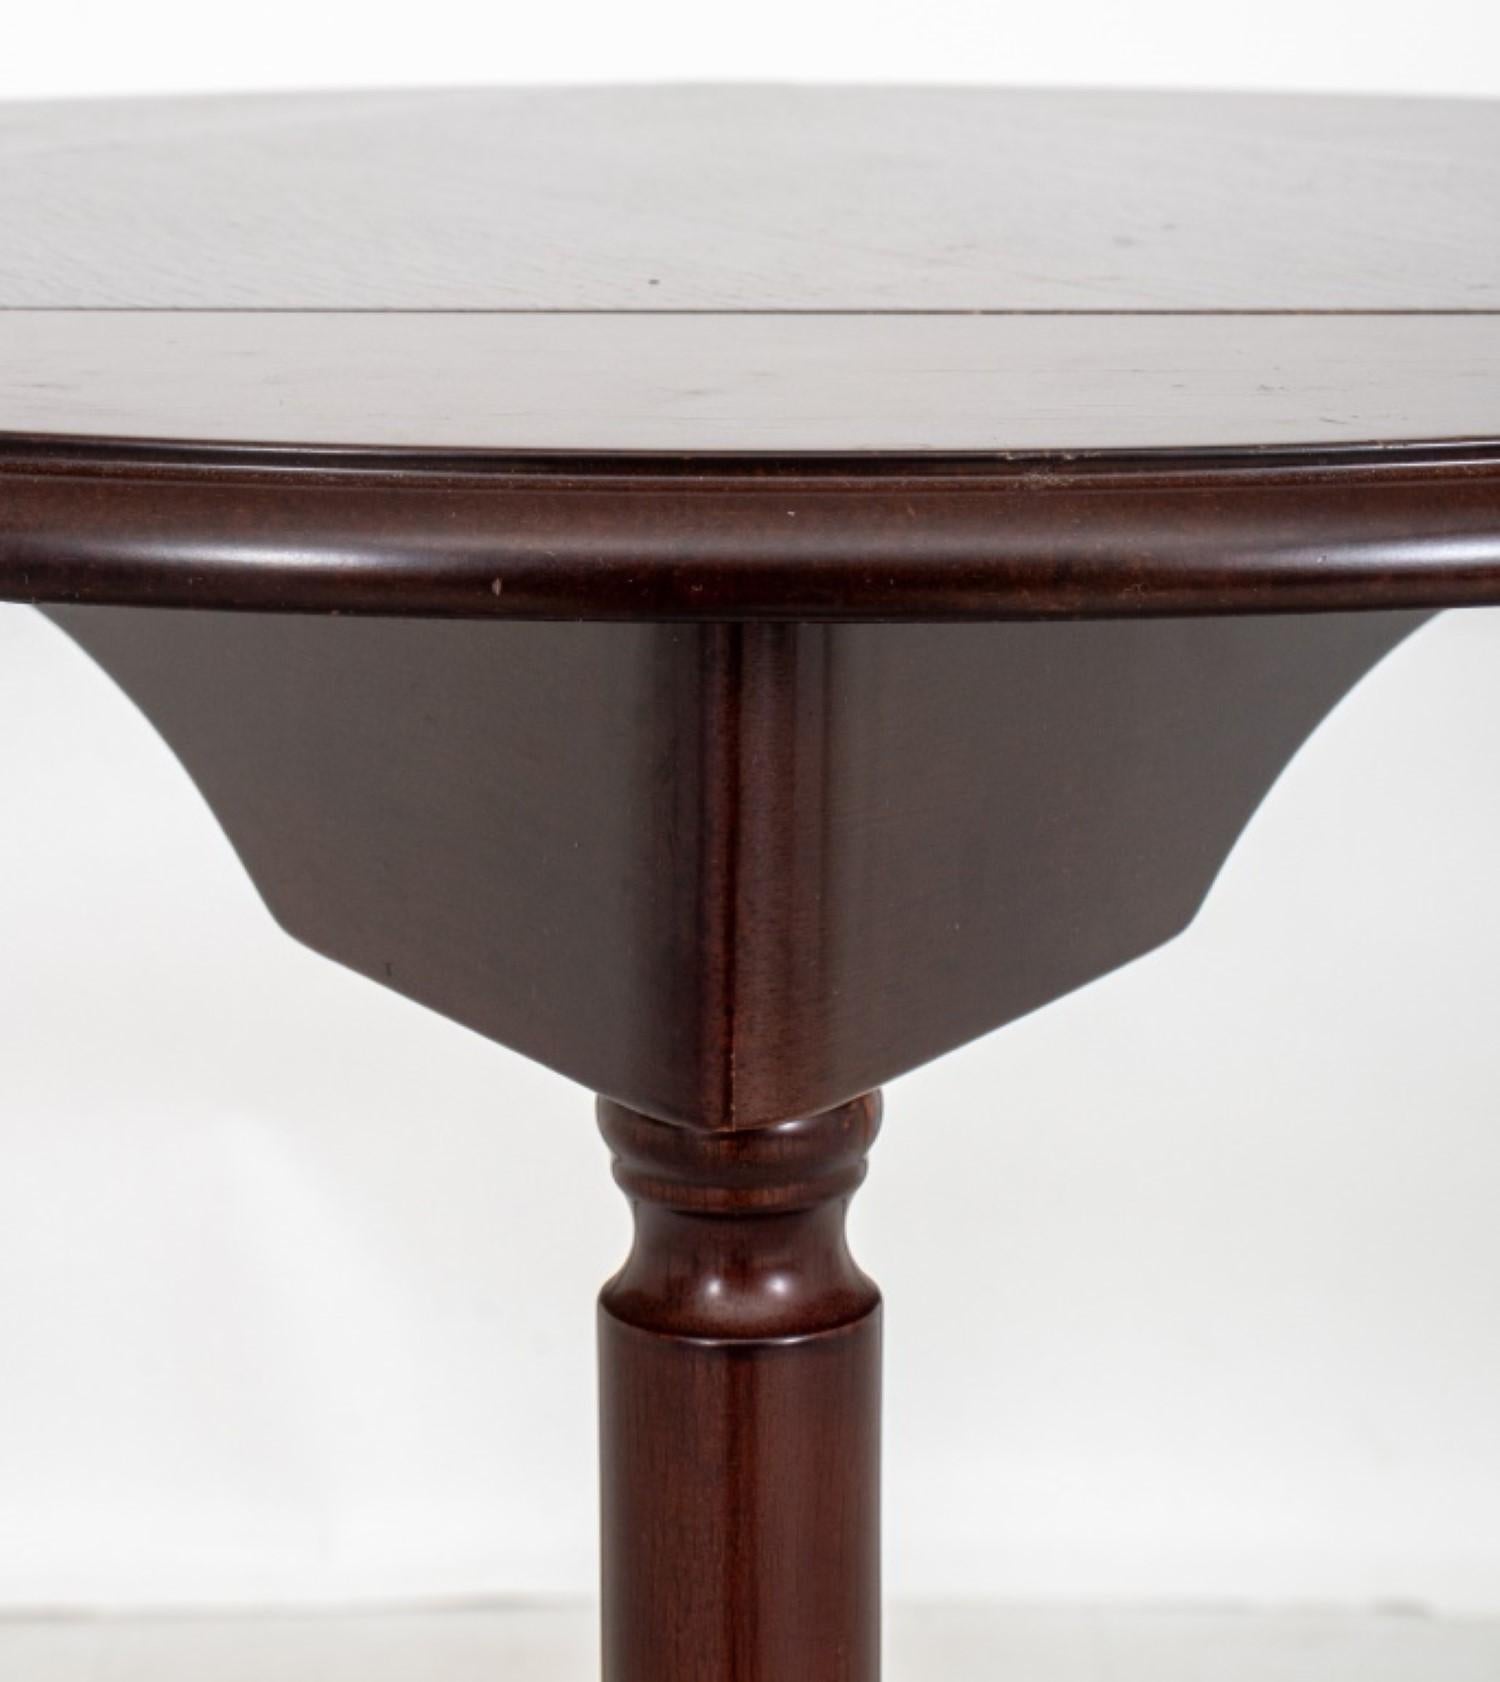 The triangular handkerchief table is made of mahogany-stained wood and features a triangular drop-leaf top. It stands on three tapering columnar legs that terminate in pad feet. When closed,

Dealer: S138XX